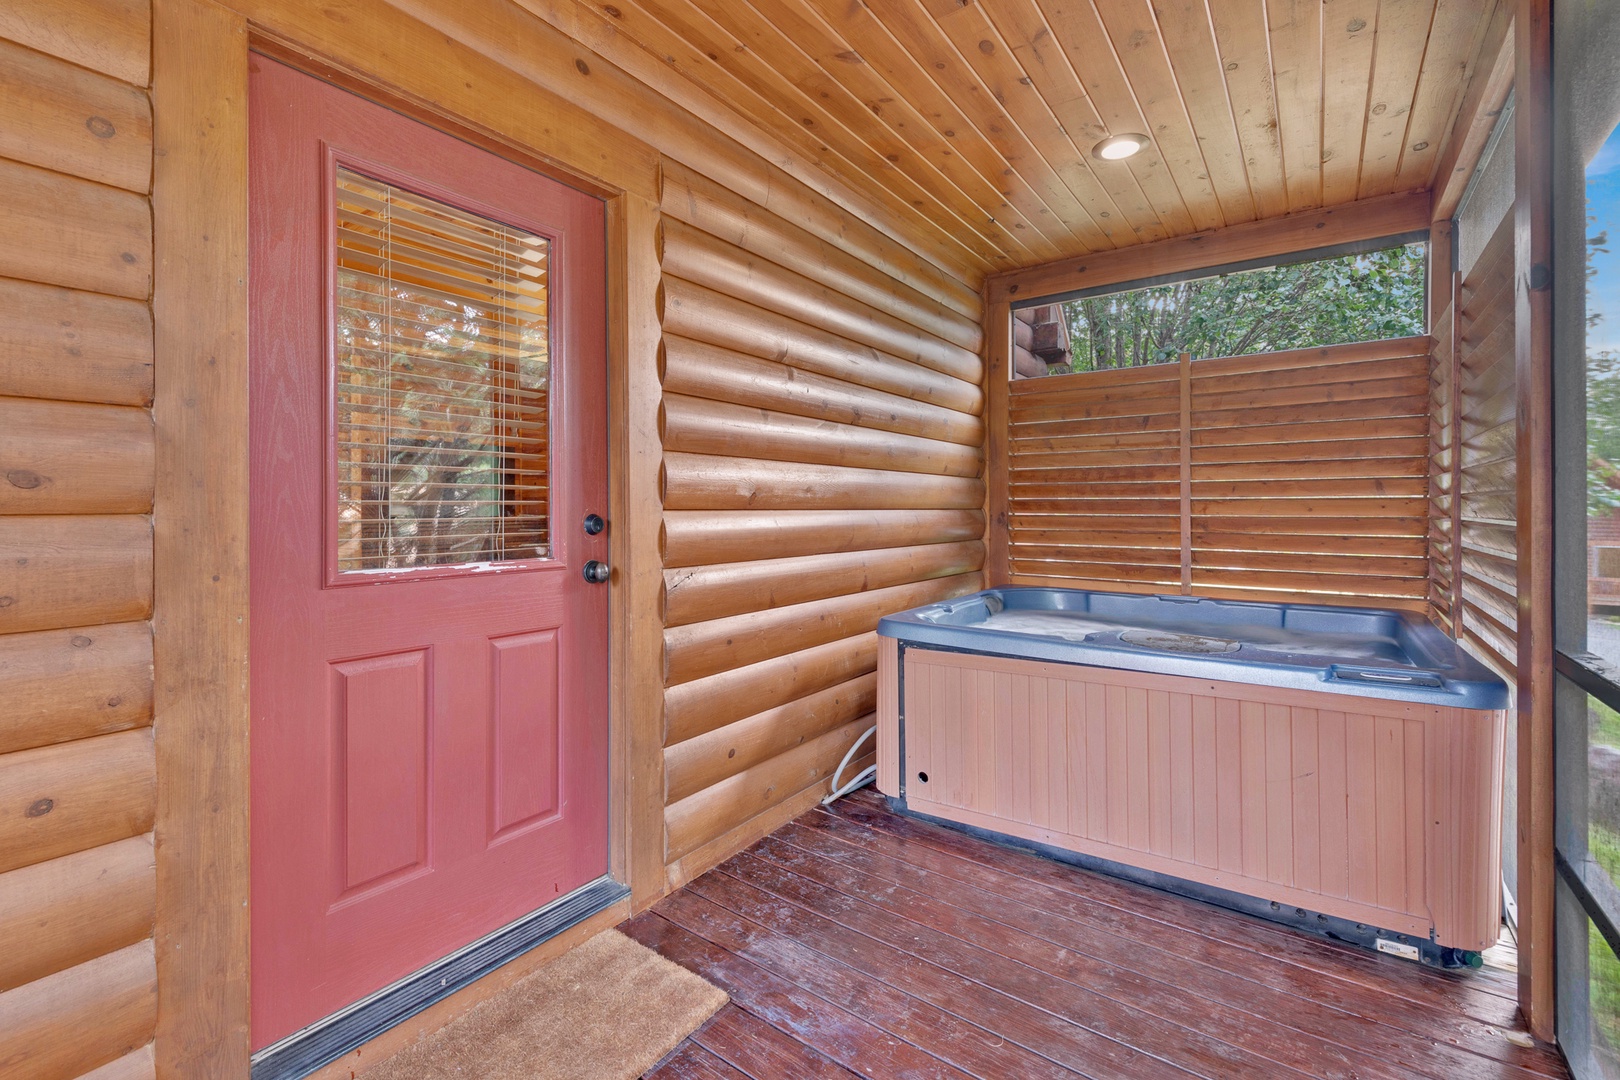 Soak your cares away in your very own private hot tub